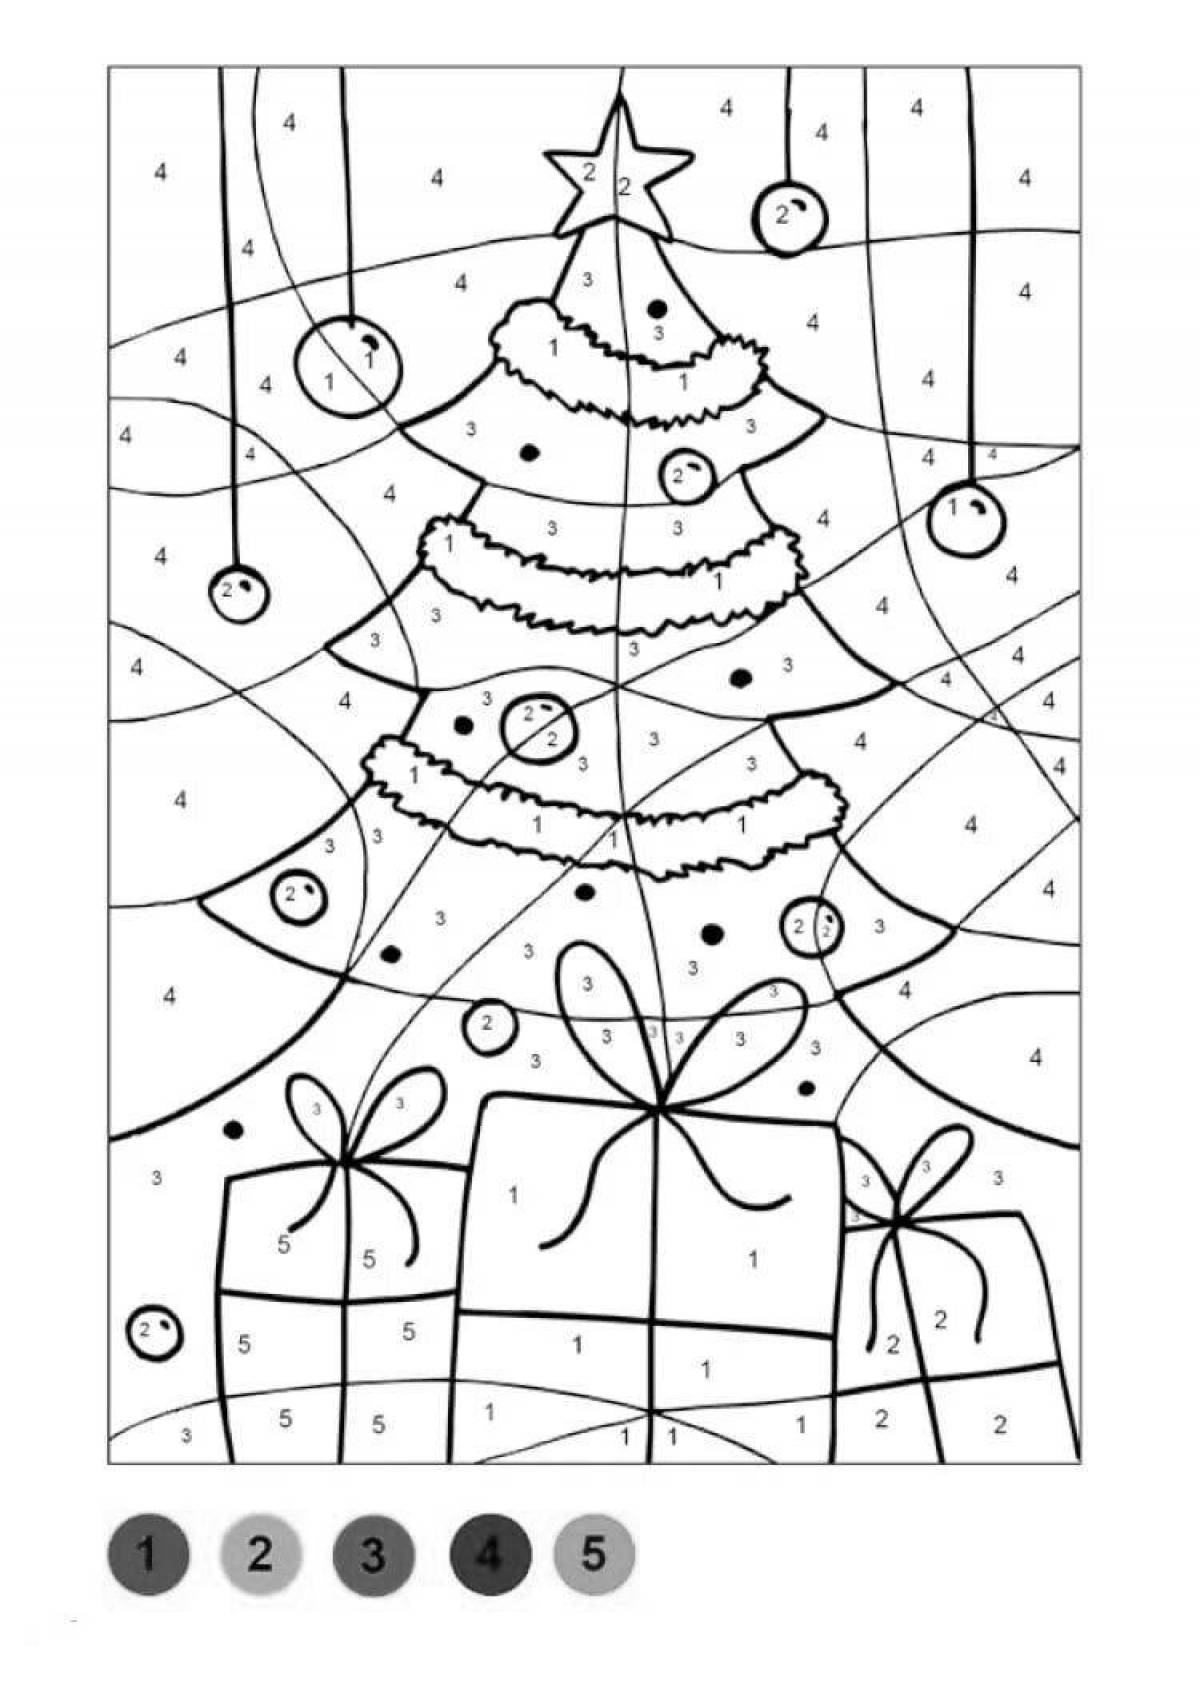 Shiny snowman coloring by numbers